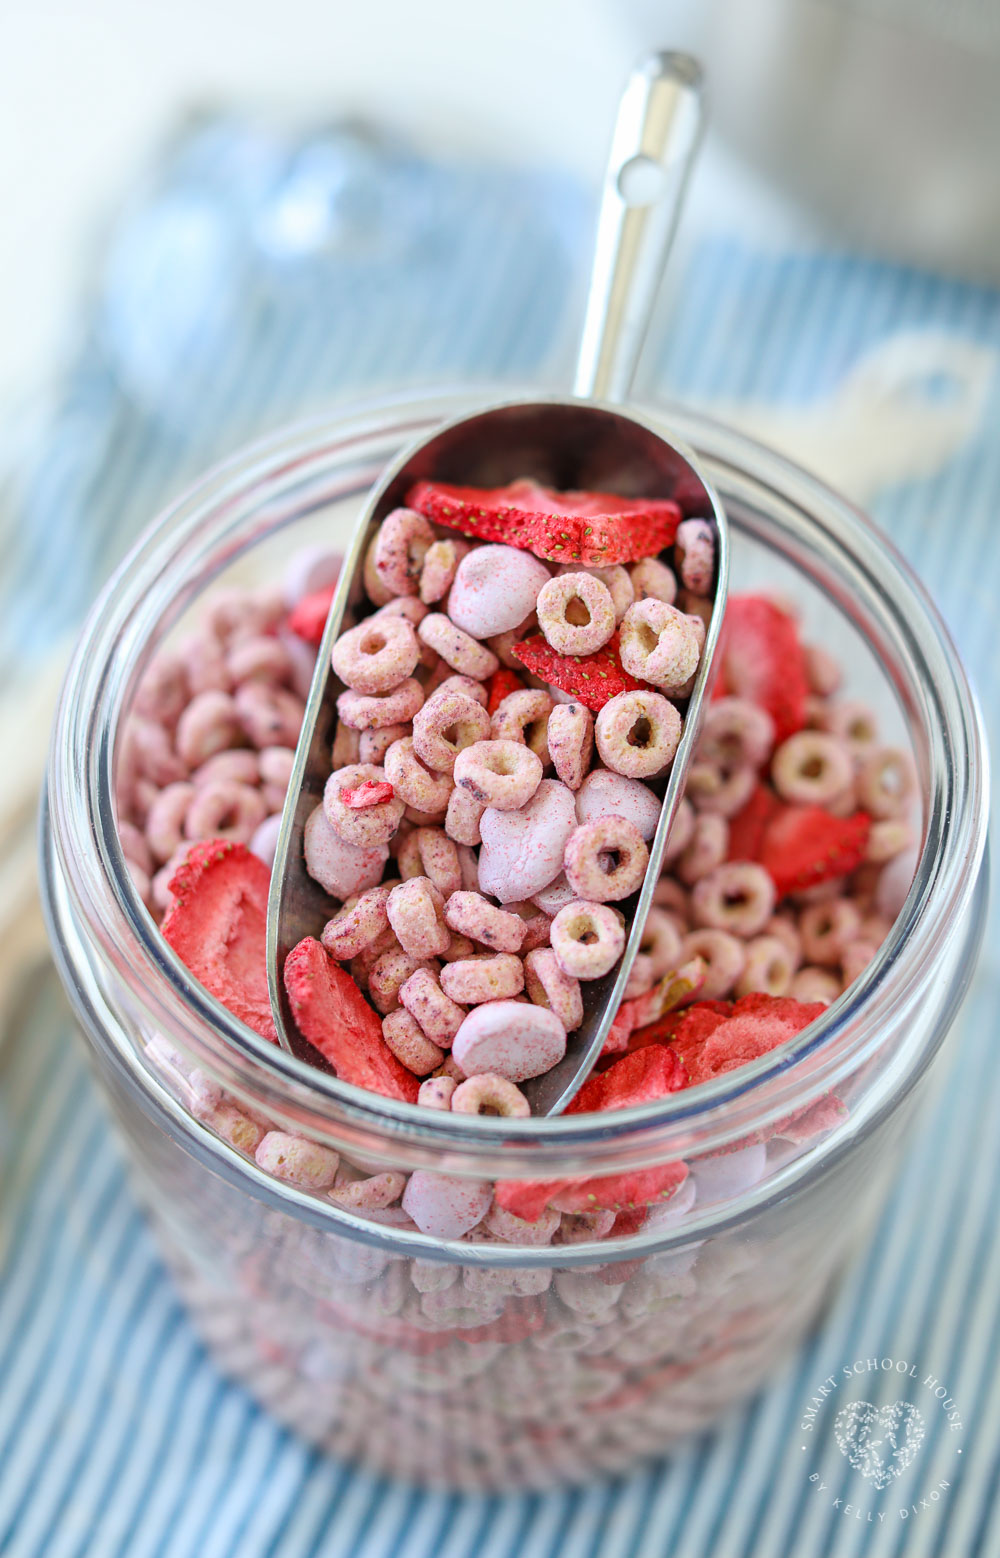 Baby Trail Mix isn't just for babies! The strawberries immediately soften when eating. This is recommended for babies who are ready to eat solids, as well as toddlers, big kids…. pretty much anyone because it’s DELICIOUS!